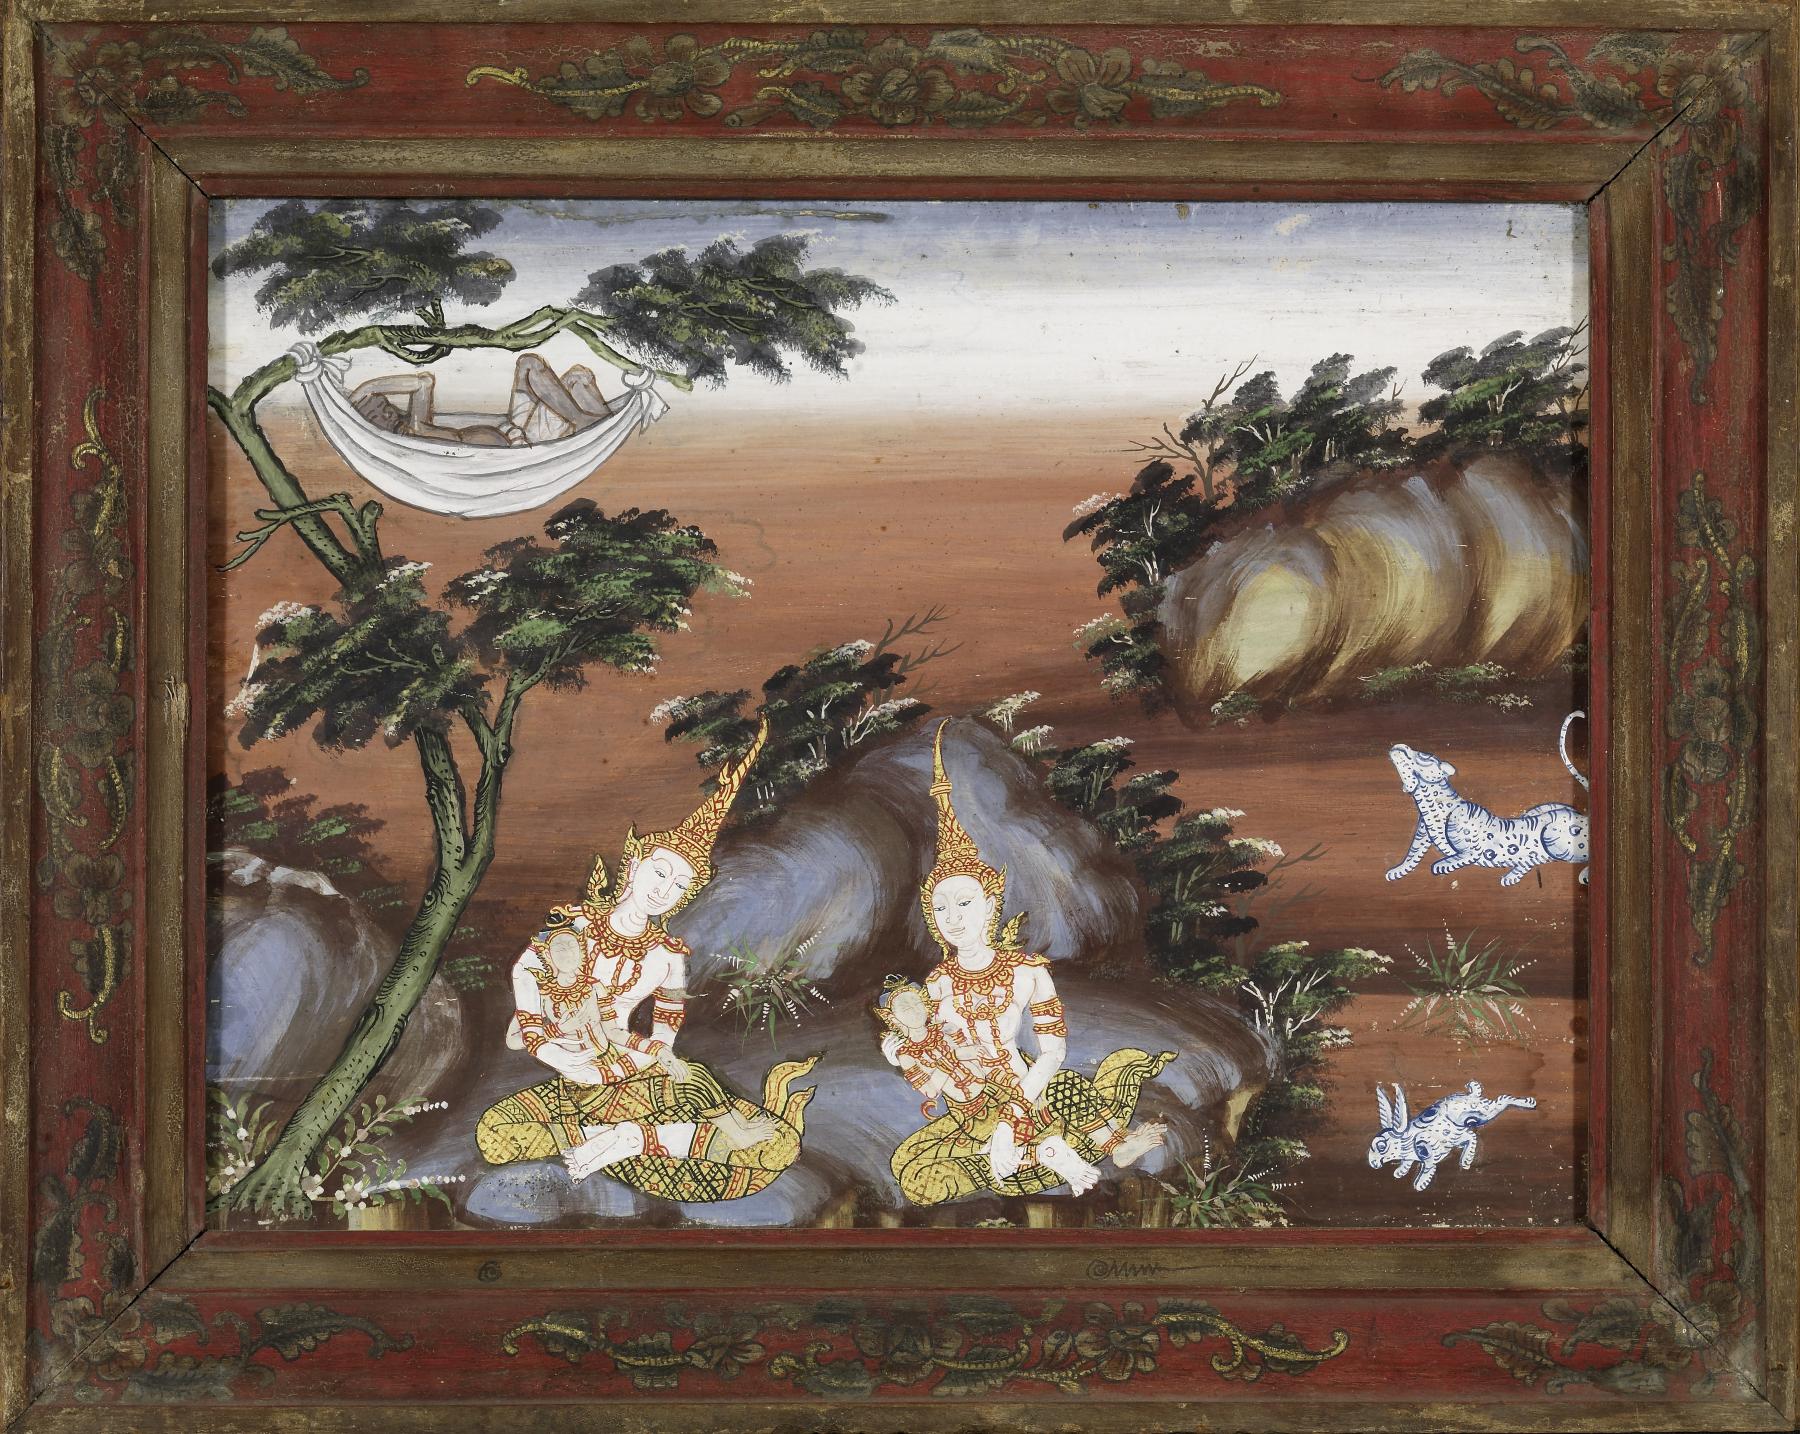 Image for Vessantara Jataka, Chapter 11: While Jujaka Sleeps the Children are Cared For